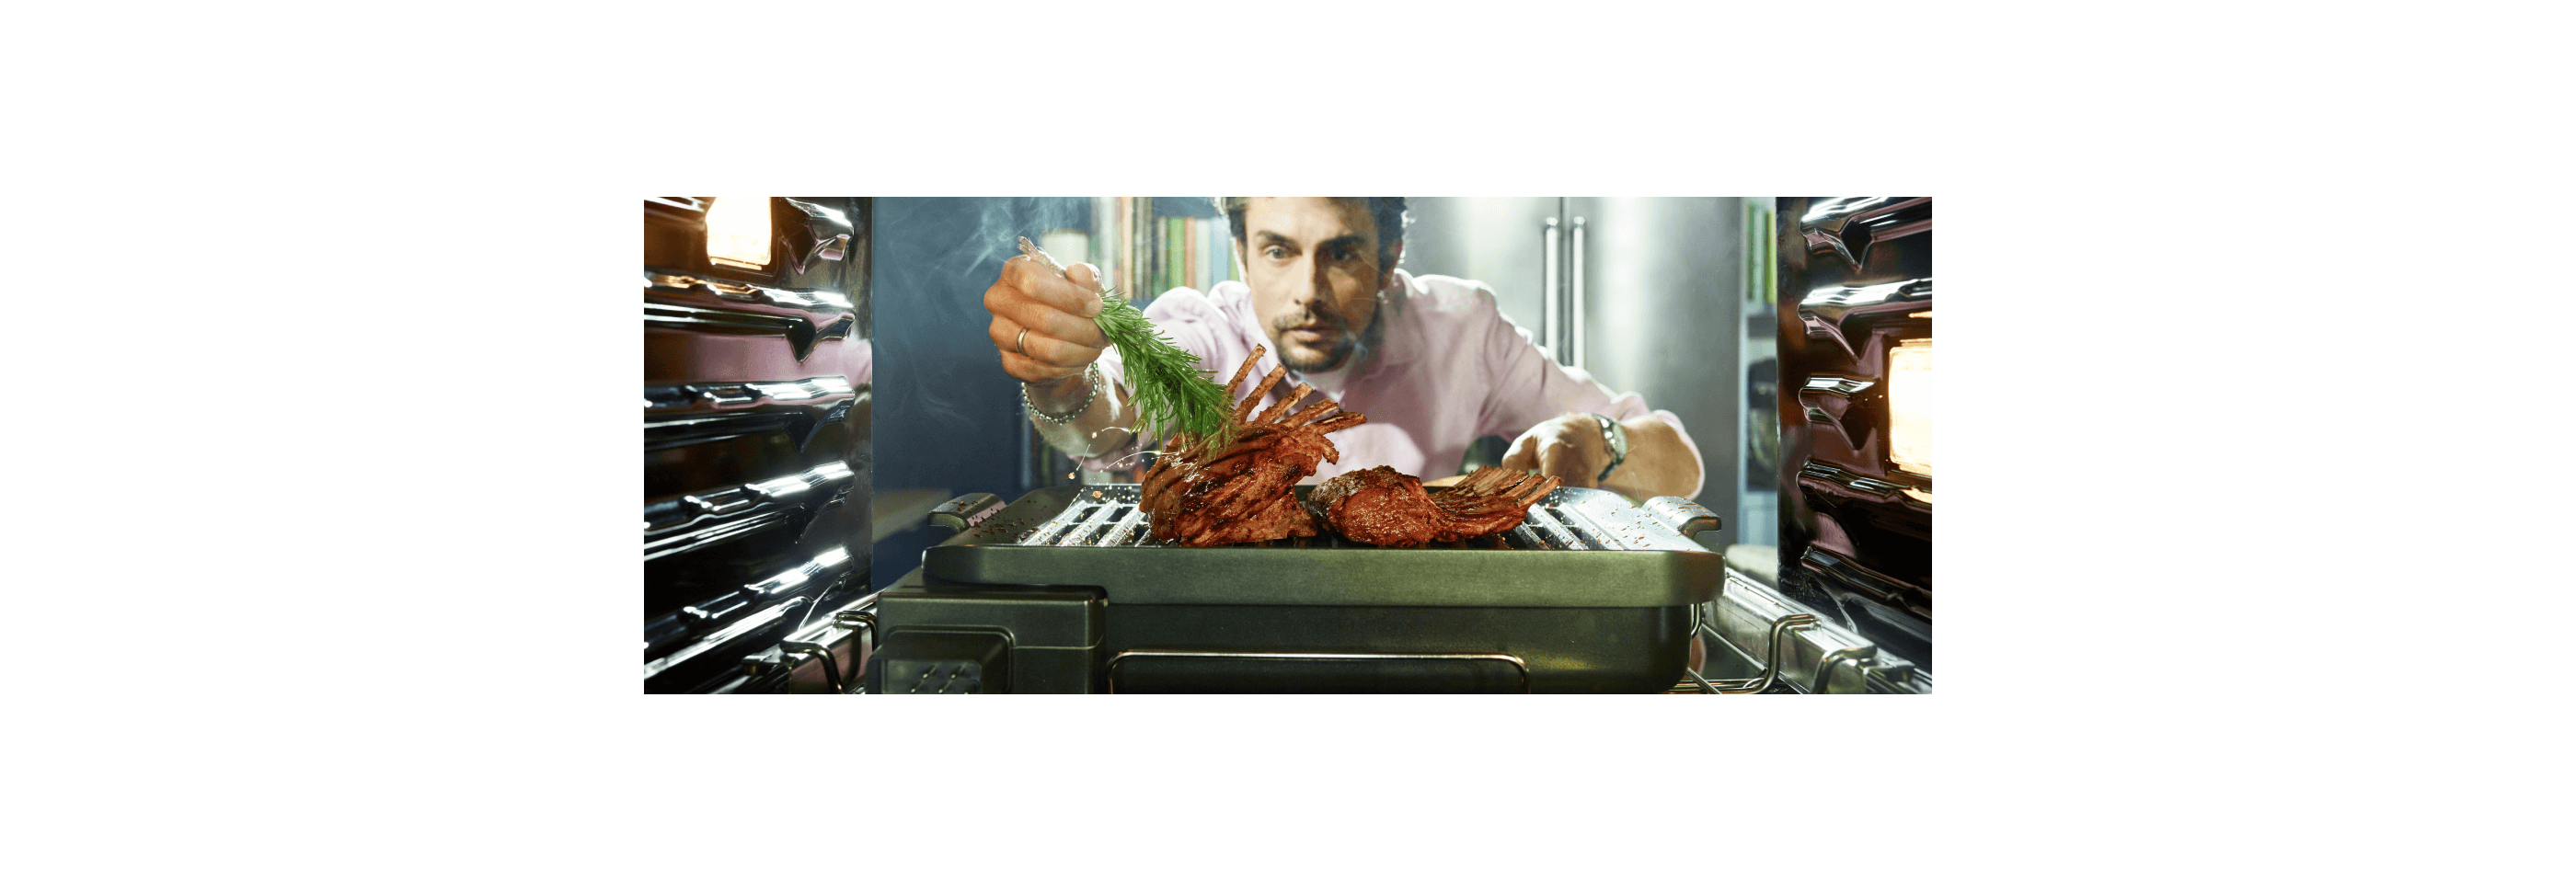 A view from inside an oven, as a man intently pulls out the grill attachment to add some finishing touches to a roast he’s preparing.